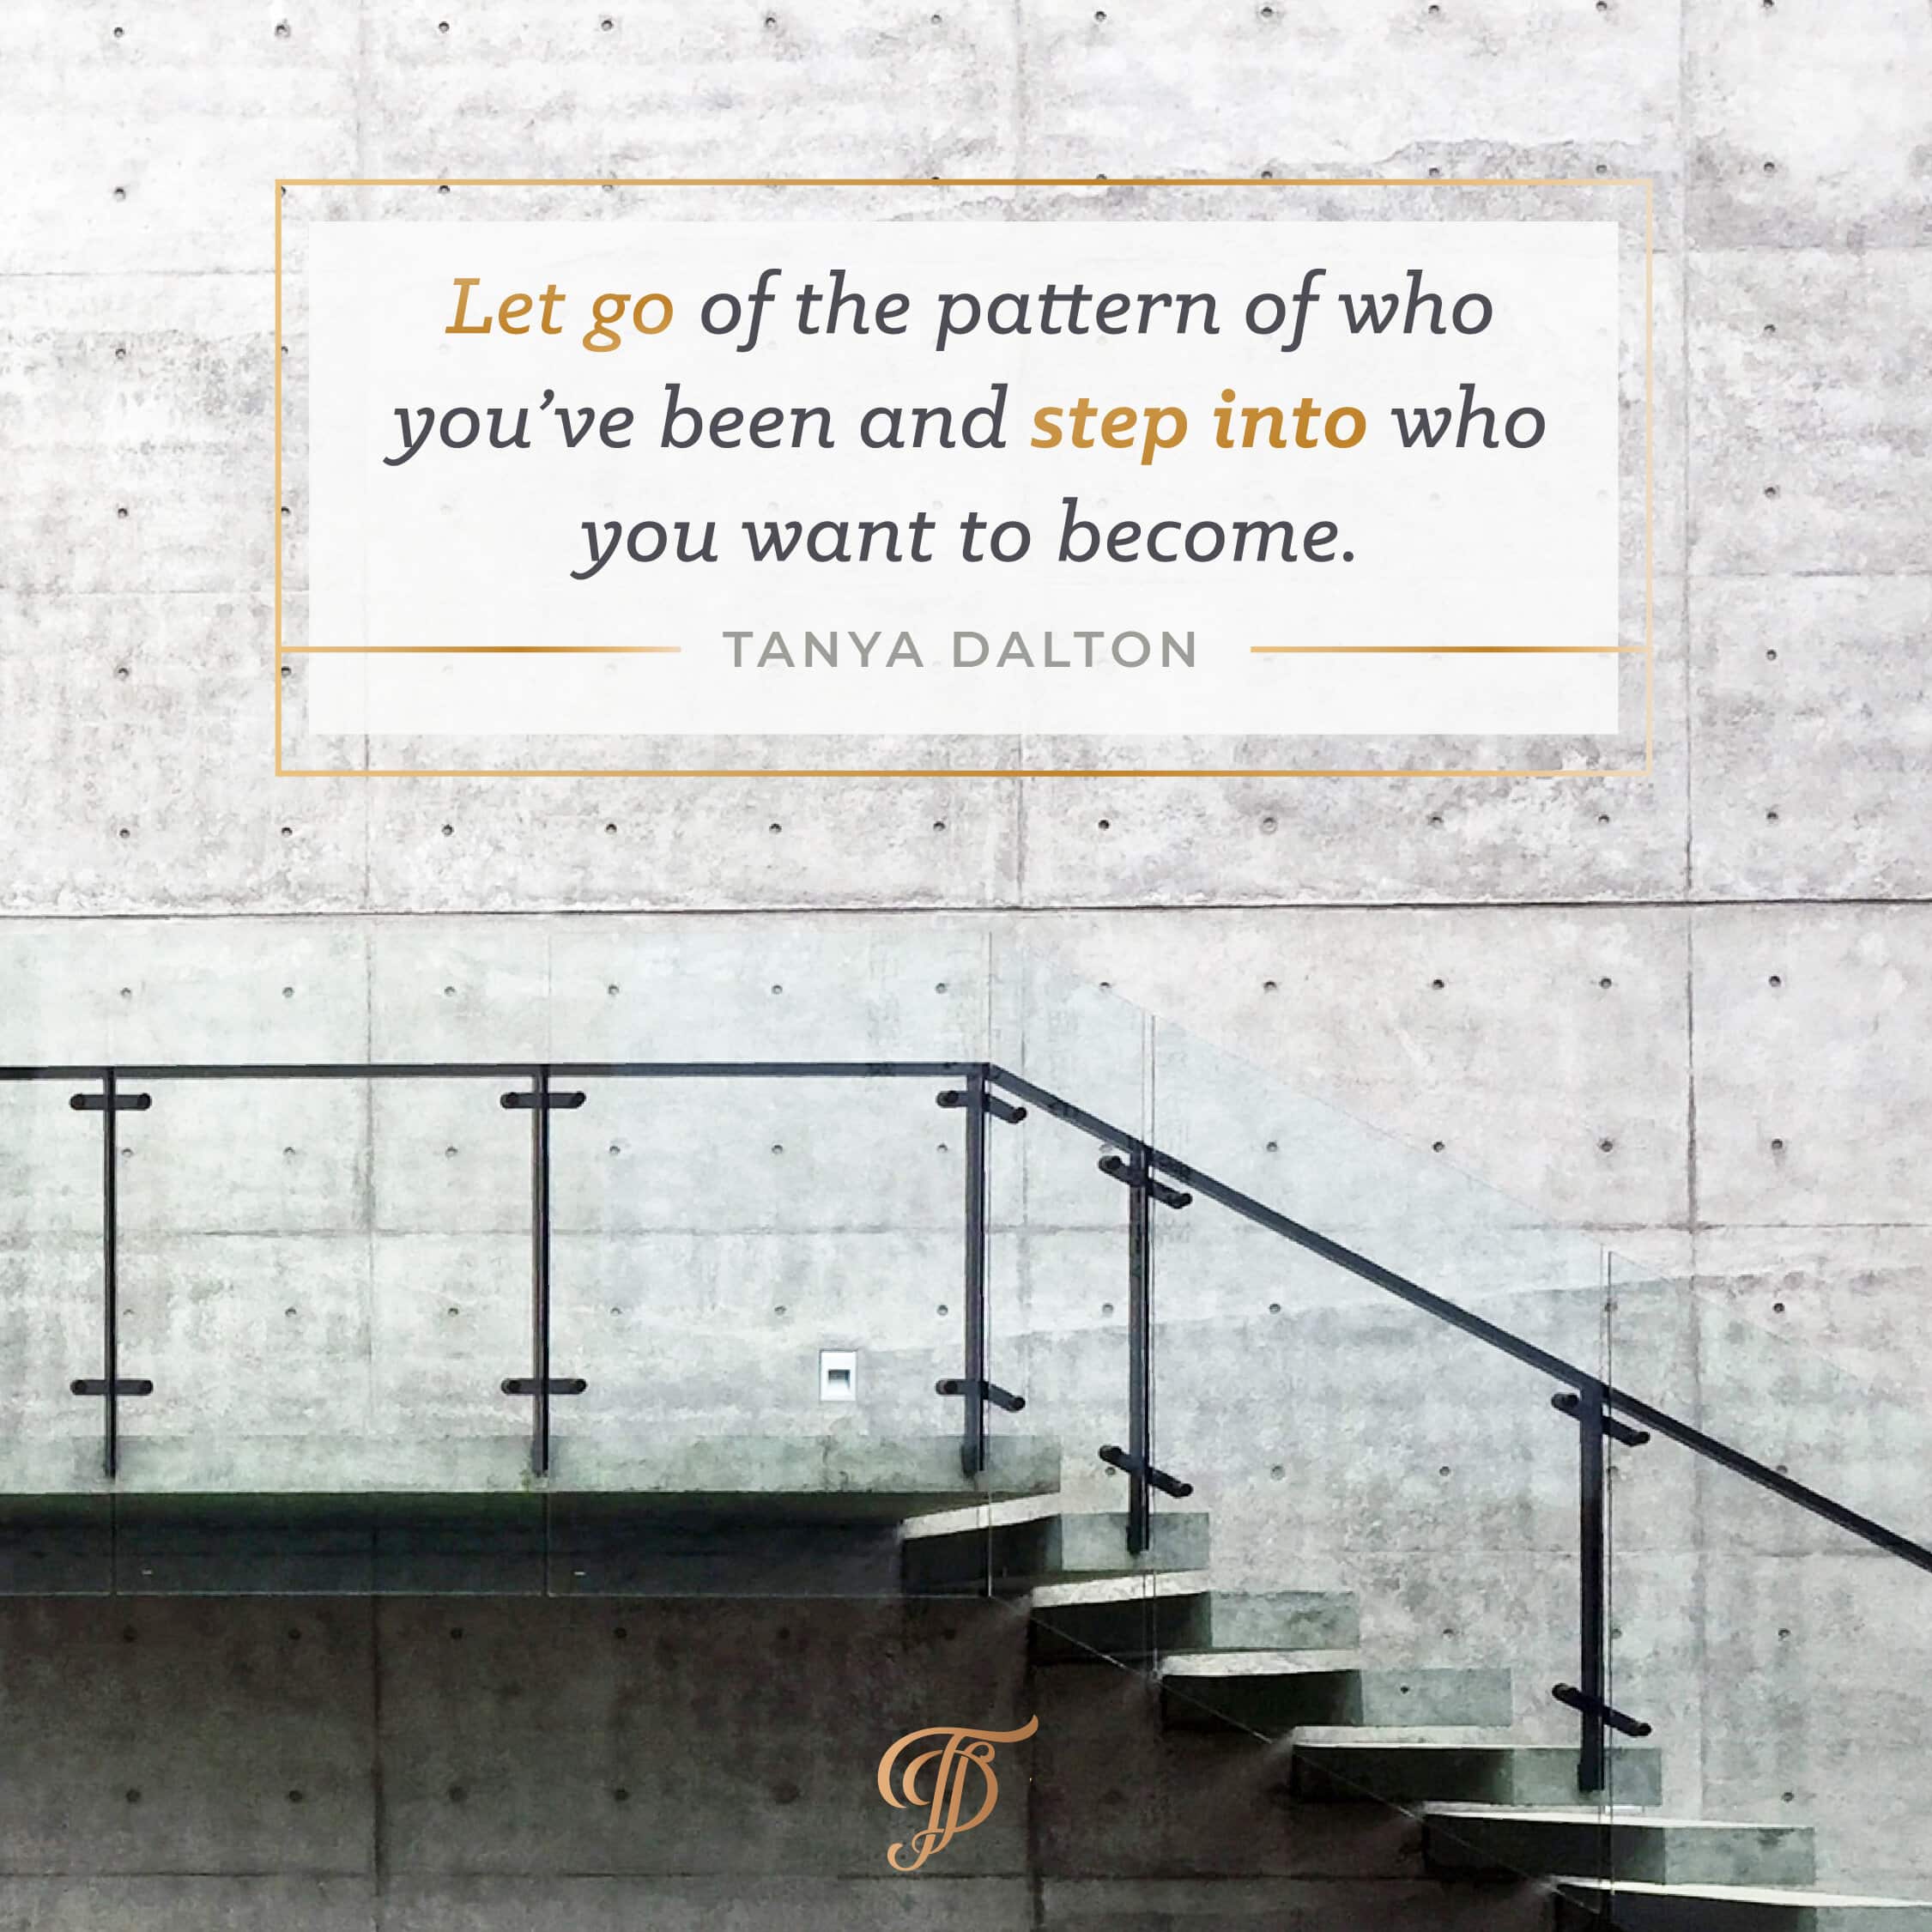 Tanya Dalton quote on creating your future